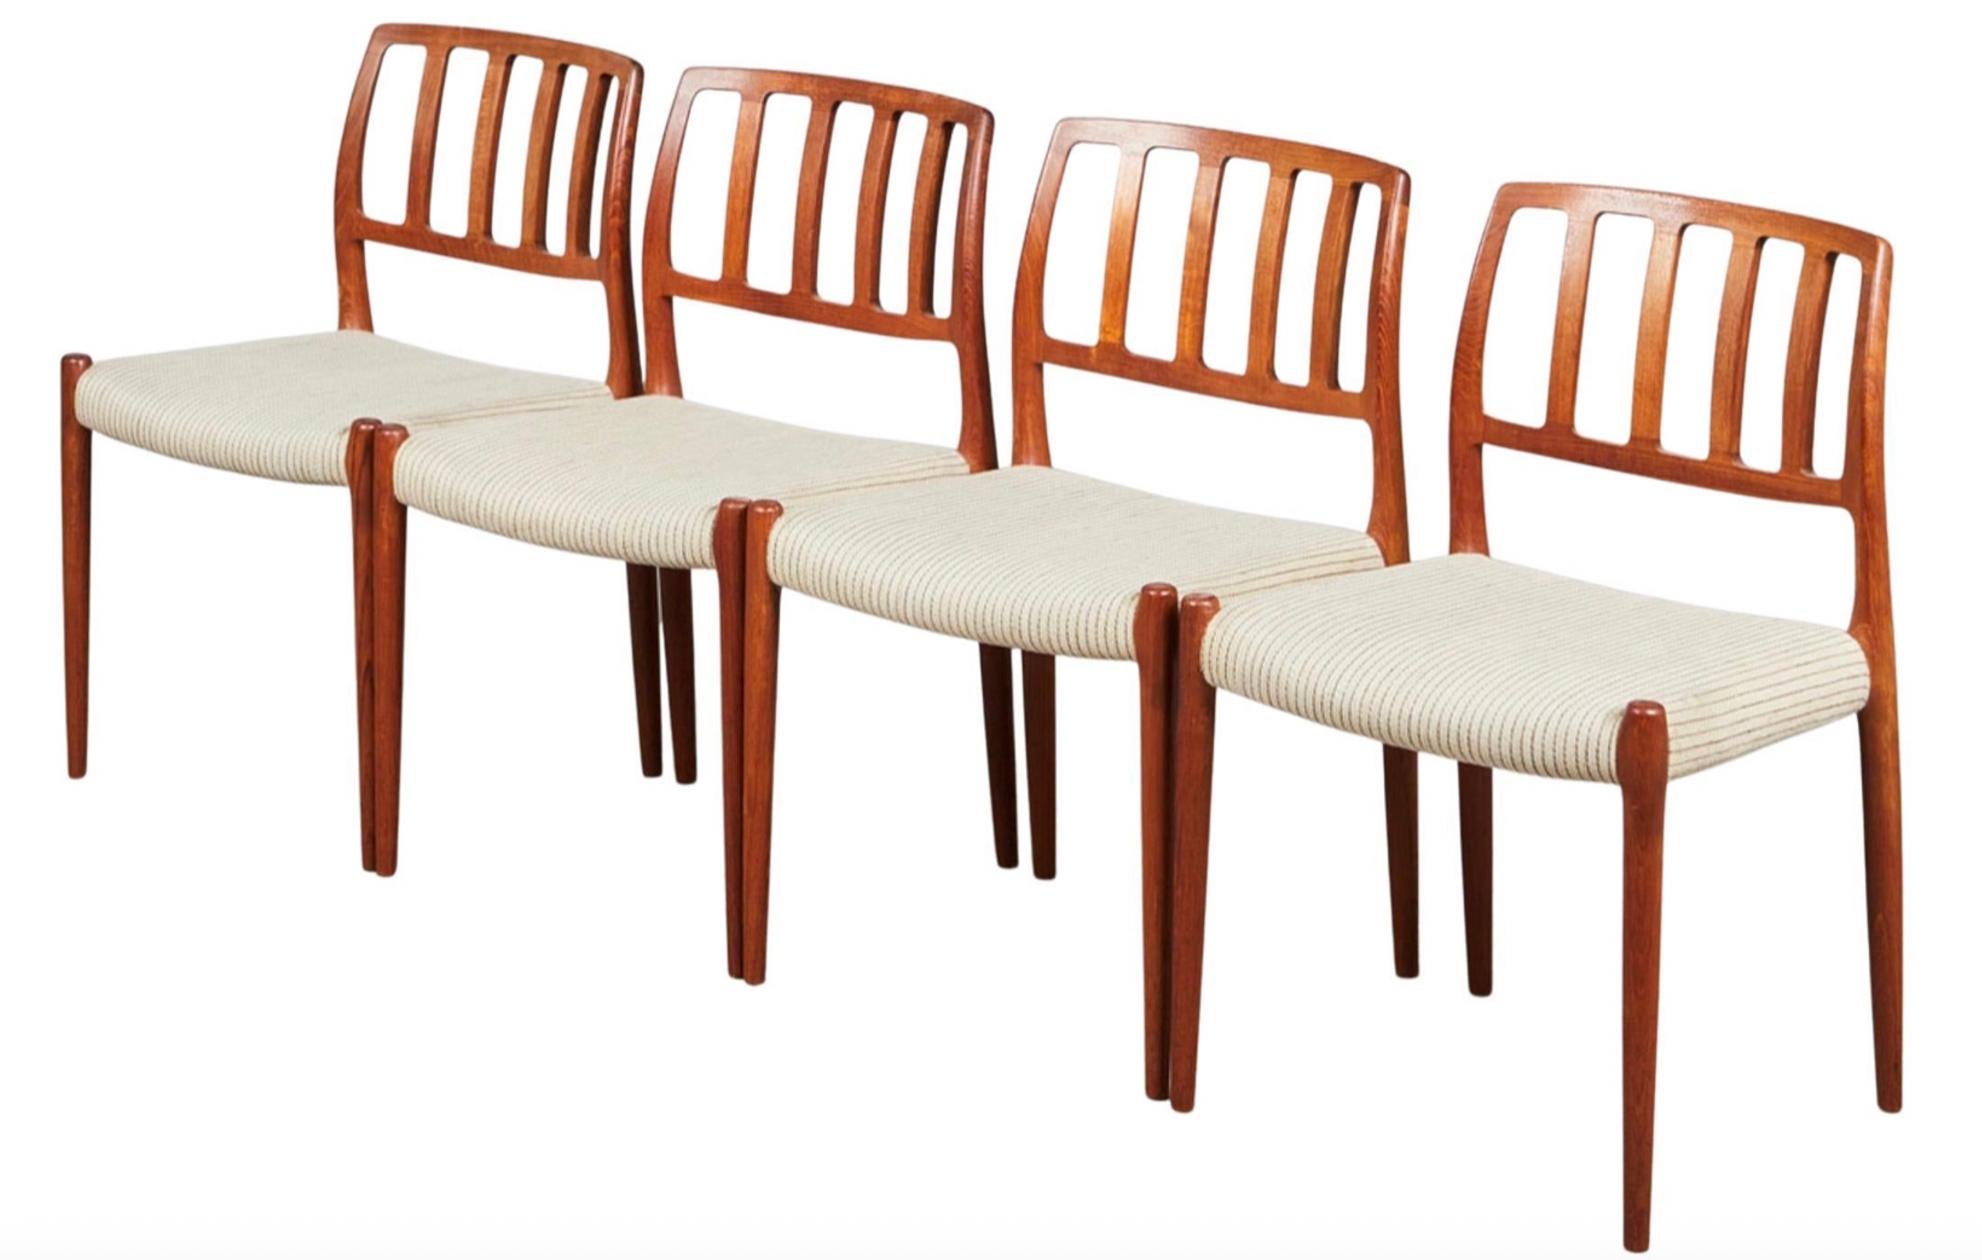 Set of four of the iconic dining chairs by Danish designer Niels Otto Møller.

Made by J.P. Møller.

Model No 83.

Teak. Upholstered very durable wool.

Excellent condition.

Additional info: The world famous Danish restaurant NOMA has the Niels O.